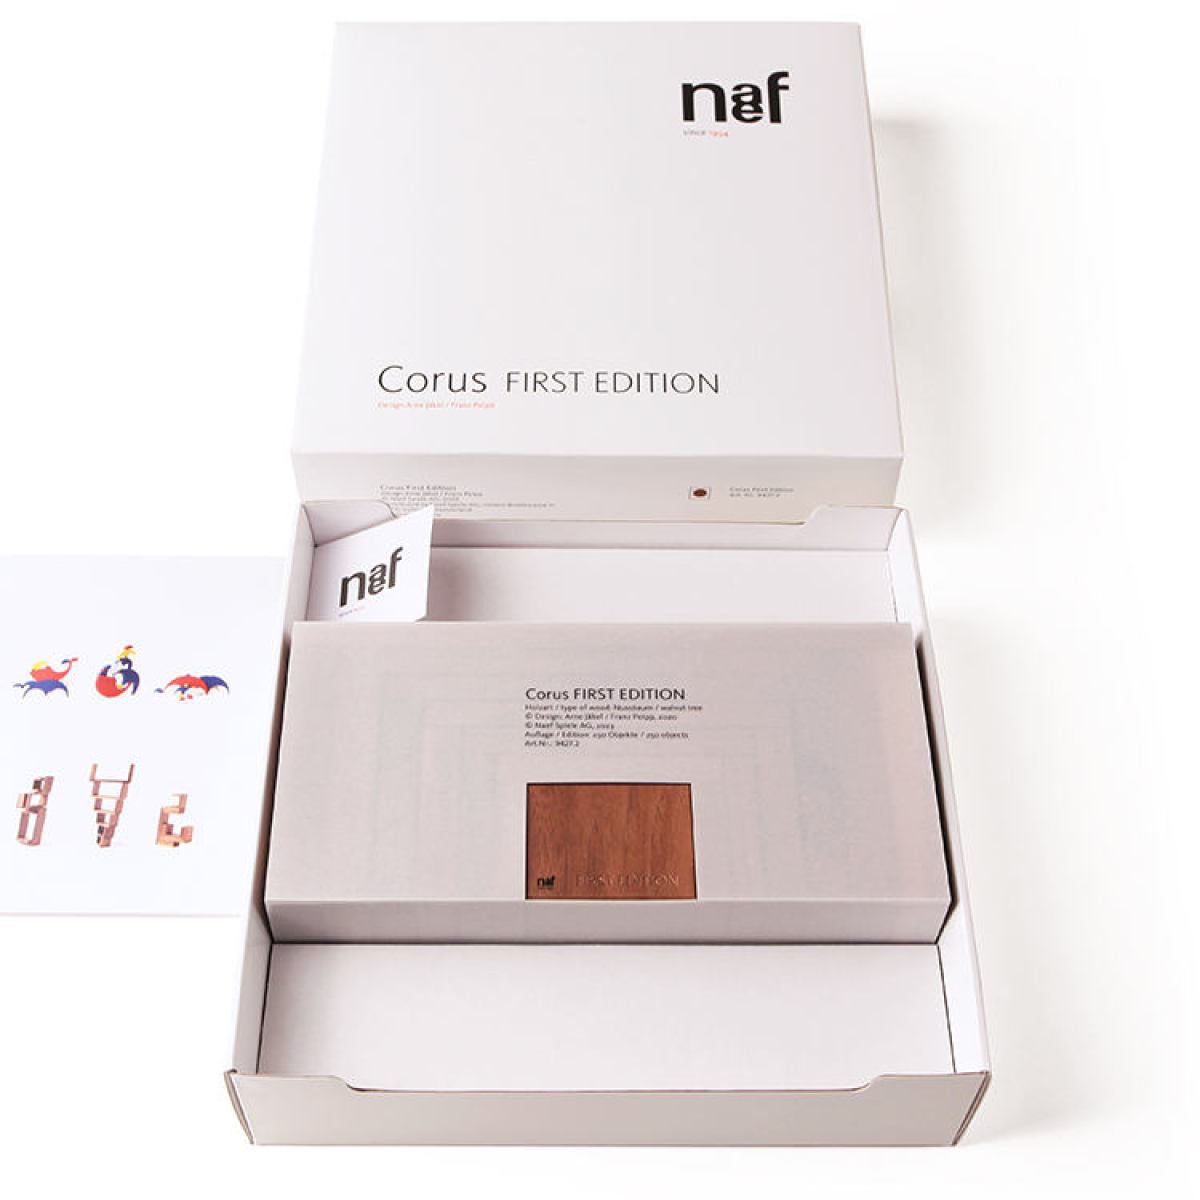 LIMITED: Corus (First Edition) – Original Naef Toy made of Wood for Standing and Hanging Constructions